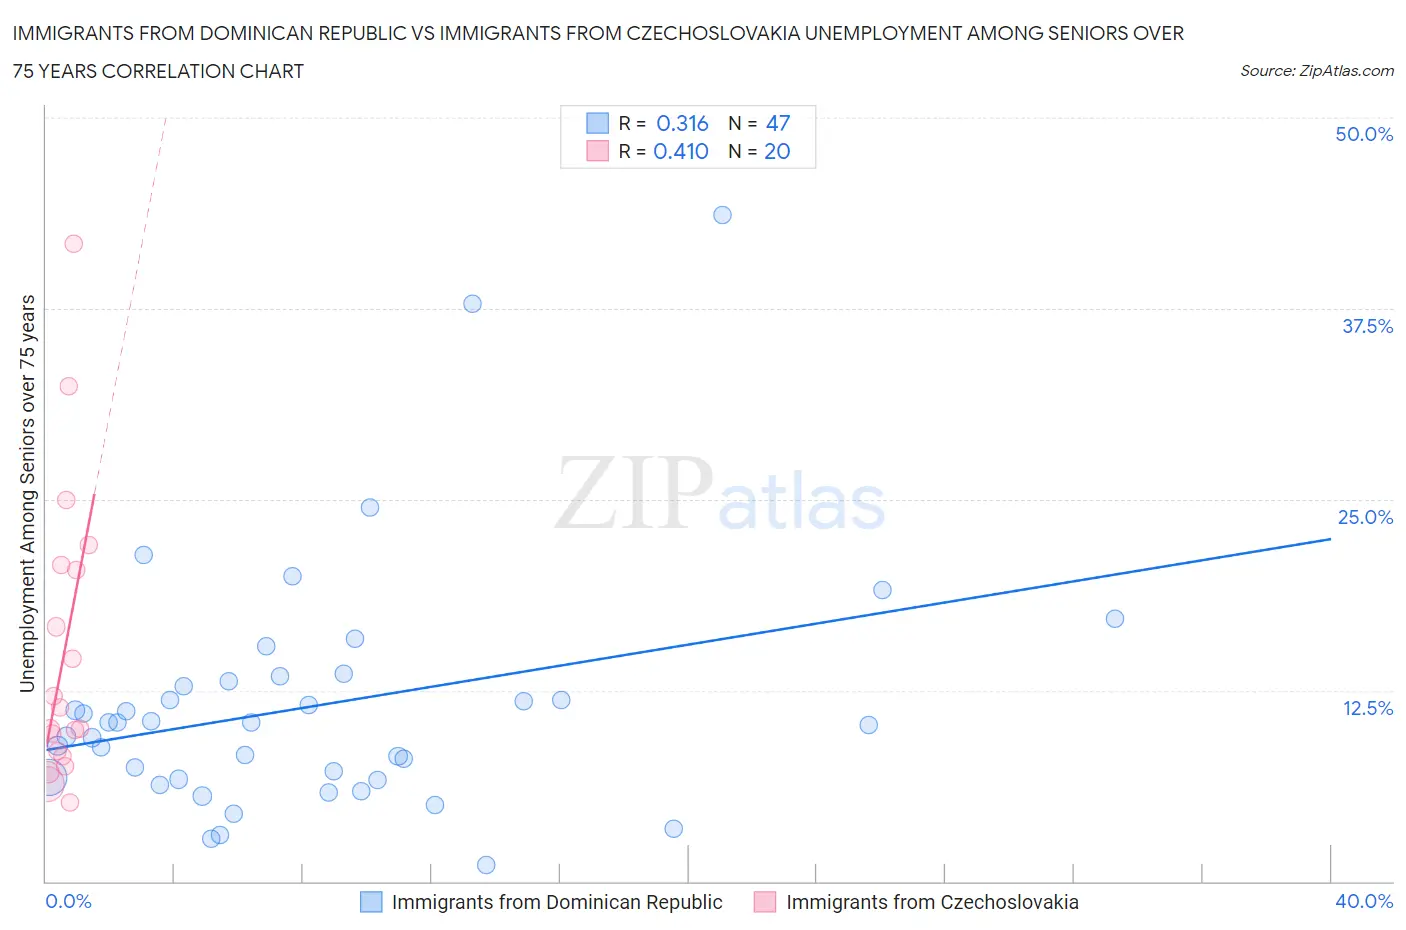 Immigrants from Dominican Republic vs Immigrants from Czechoslovakia Unemployment Among Seniors over 75 years